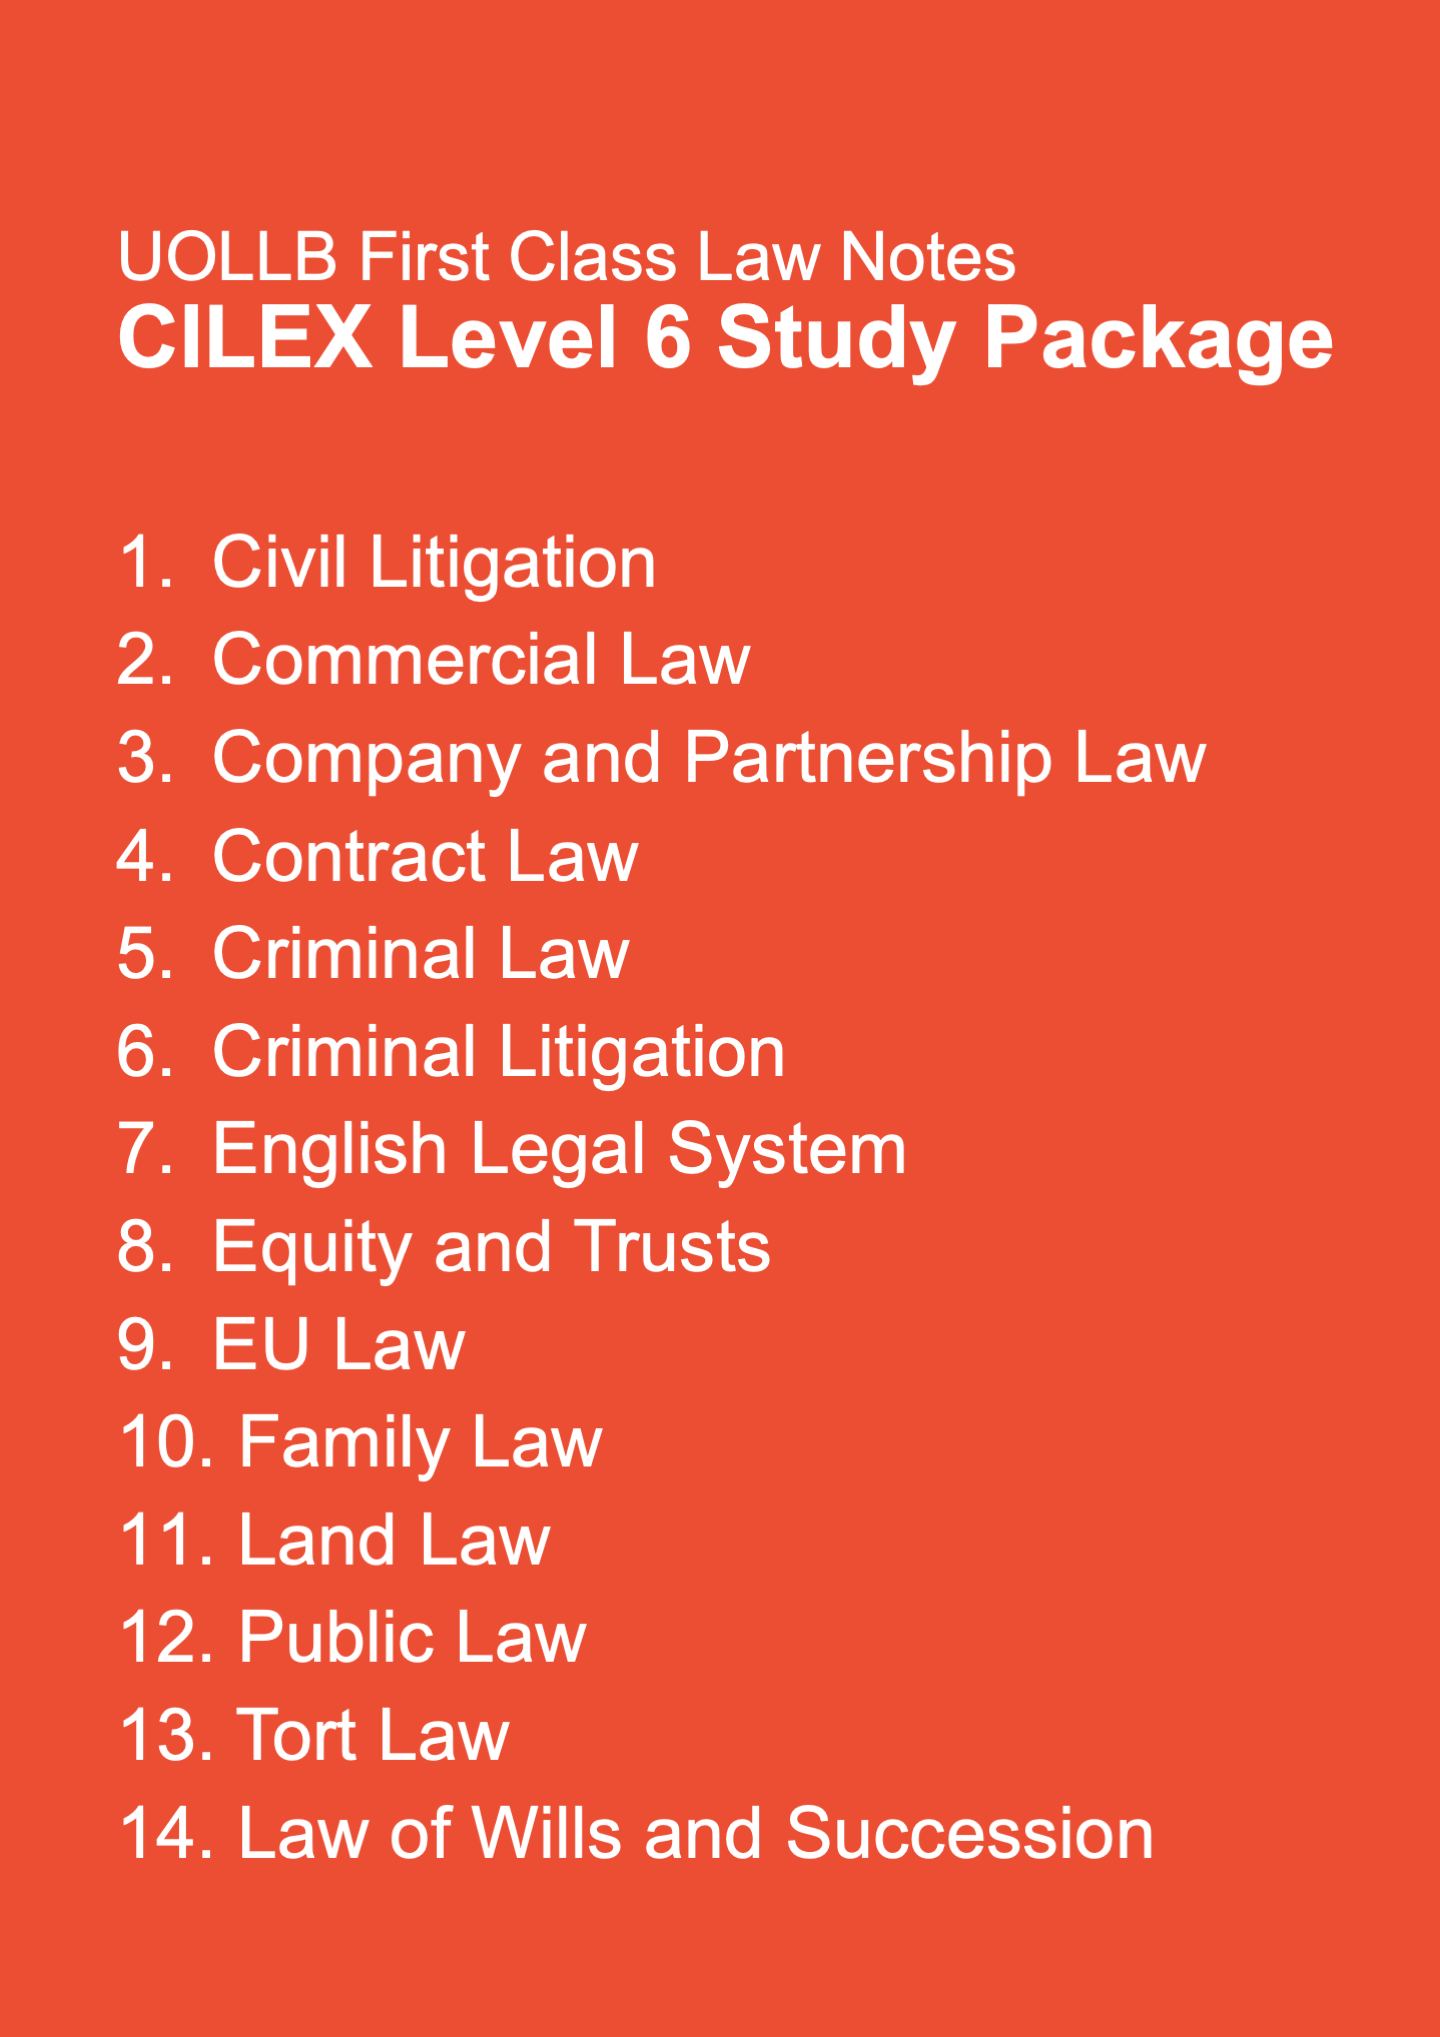 CILEX Level 6 Study Package